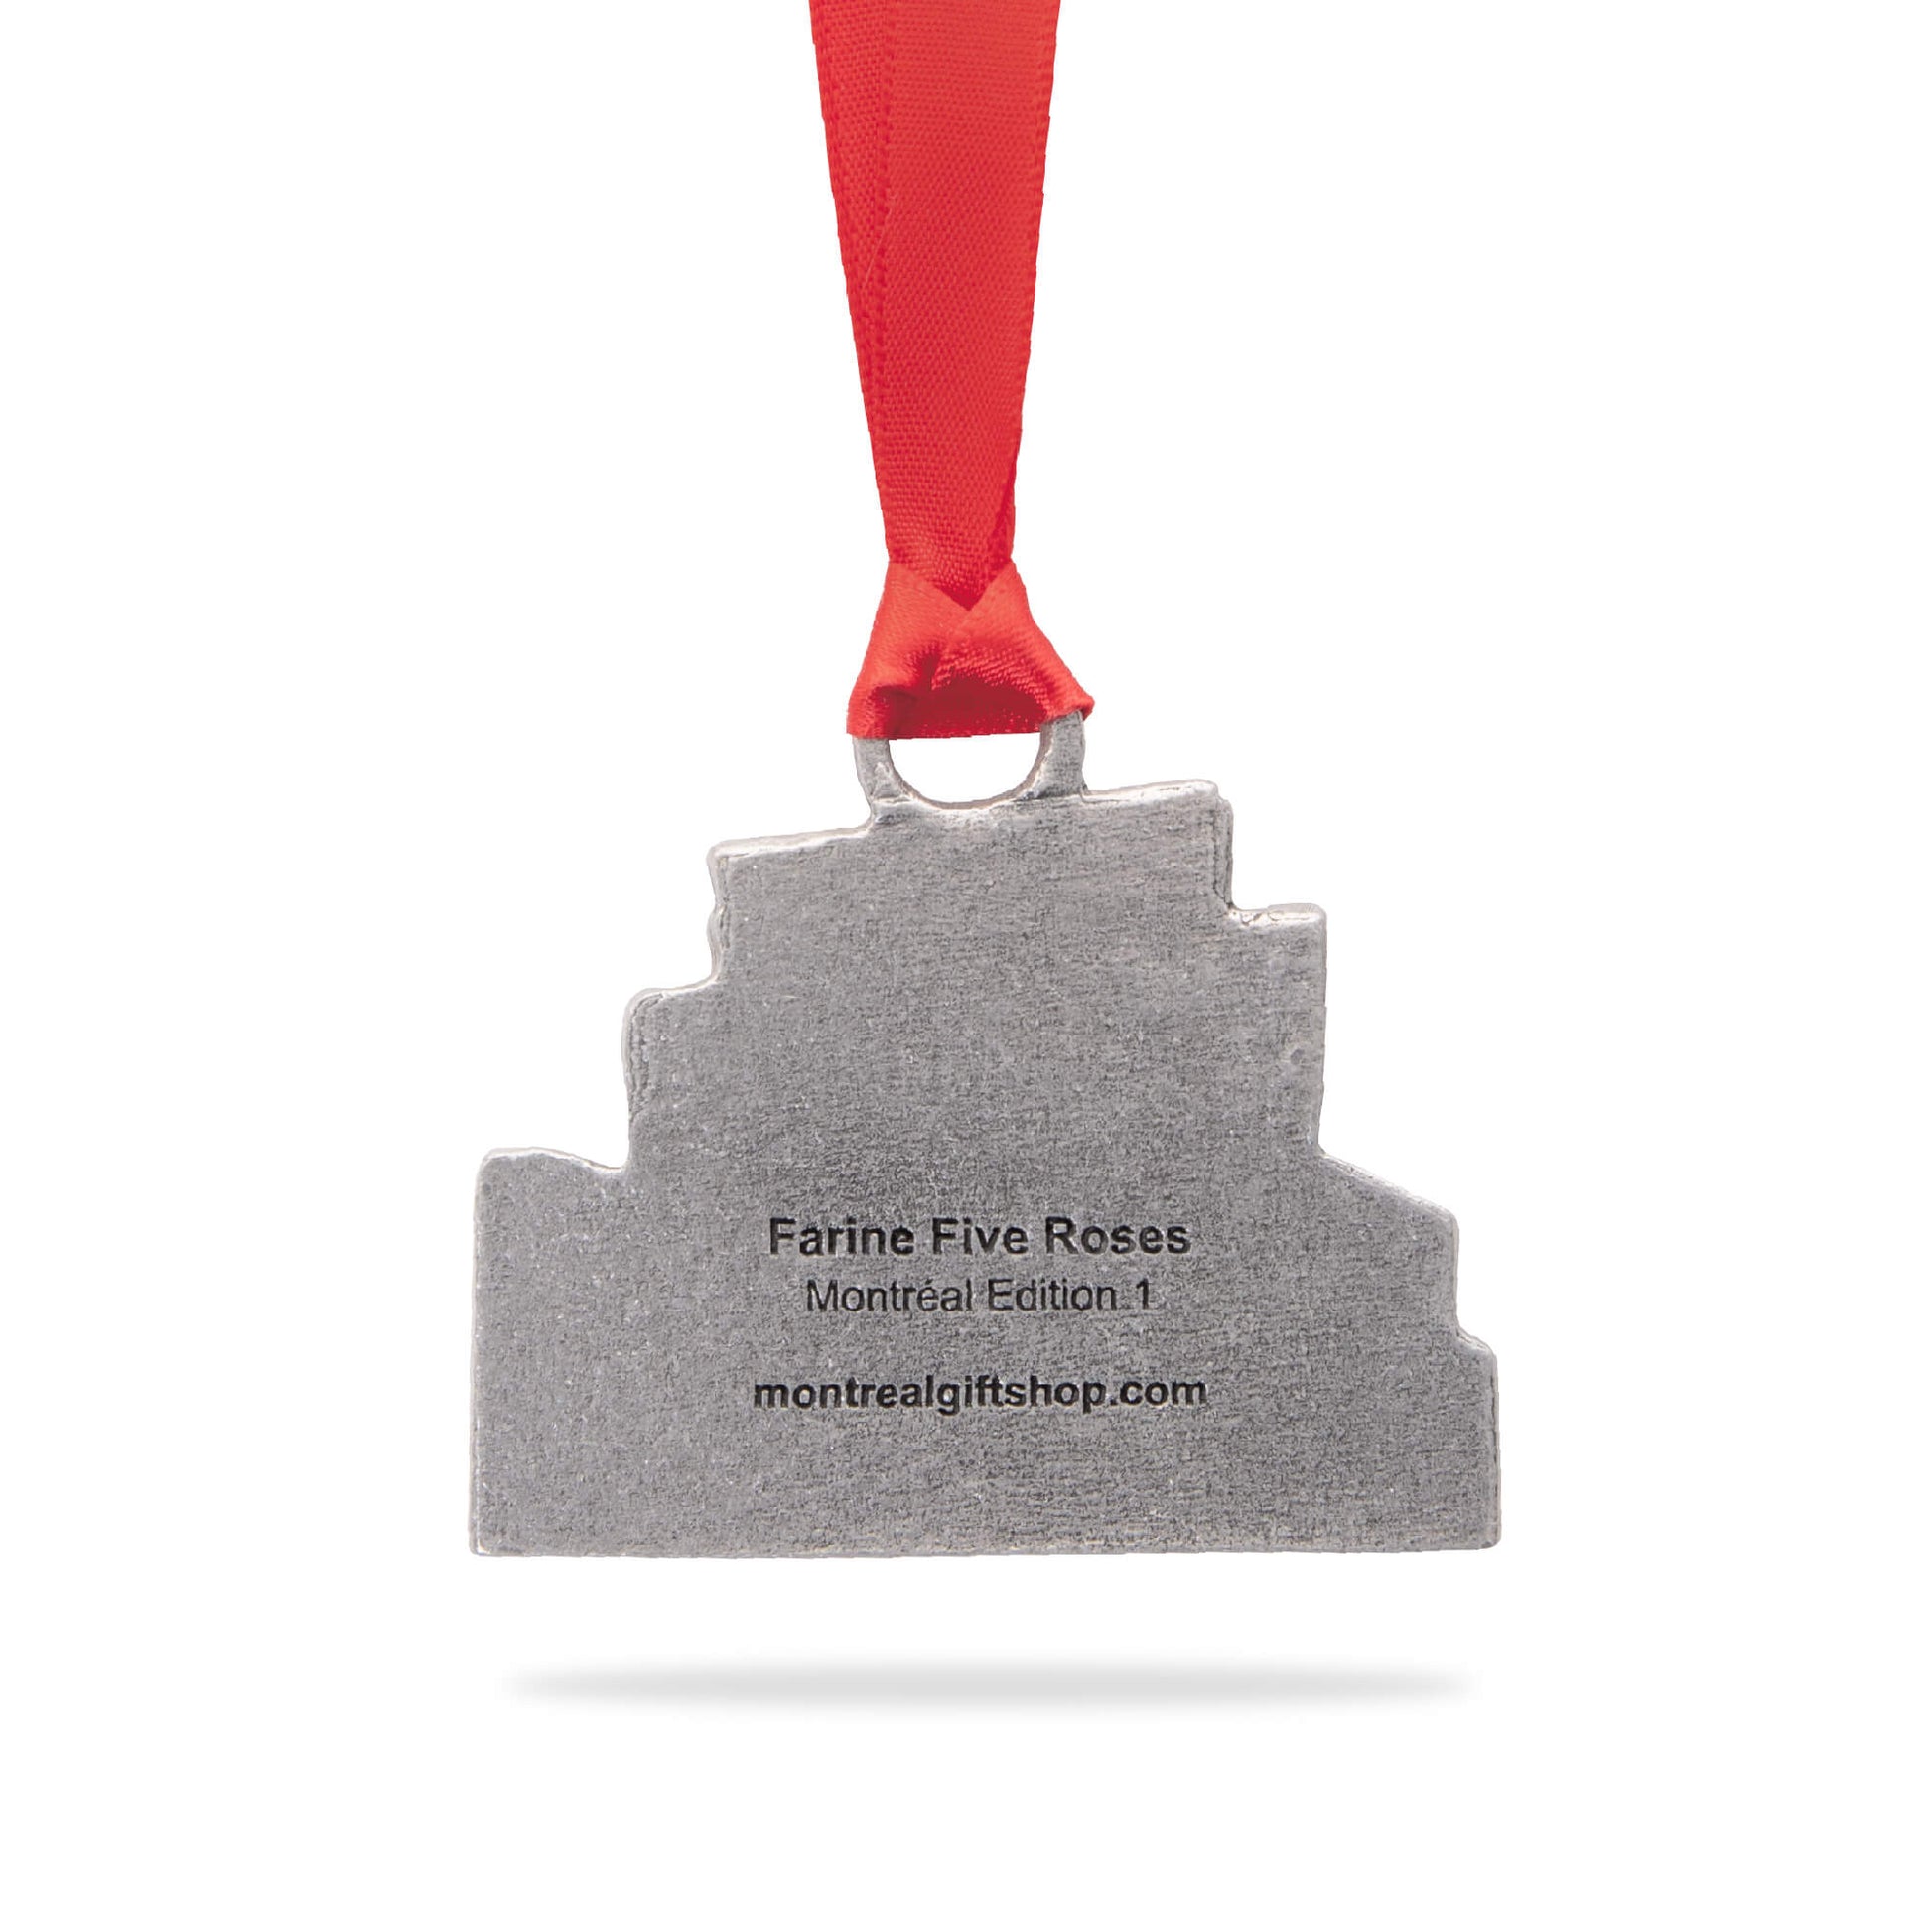 farine five roses, pewter ornament, tree decoration, red ribbon, montreal, gift, montreal edition 1